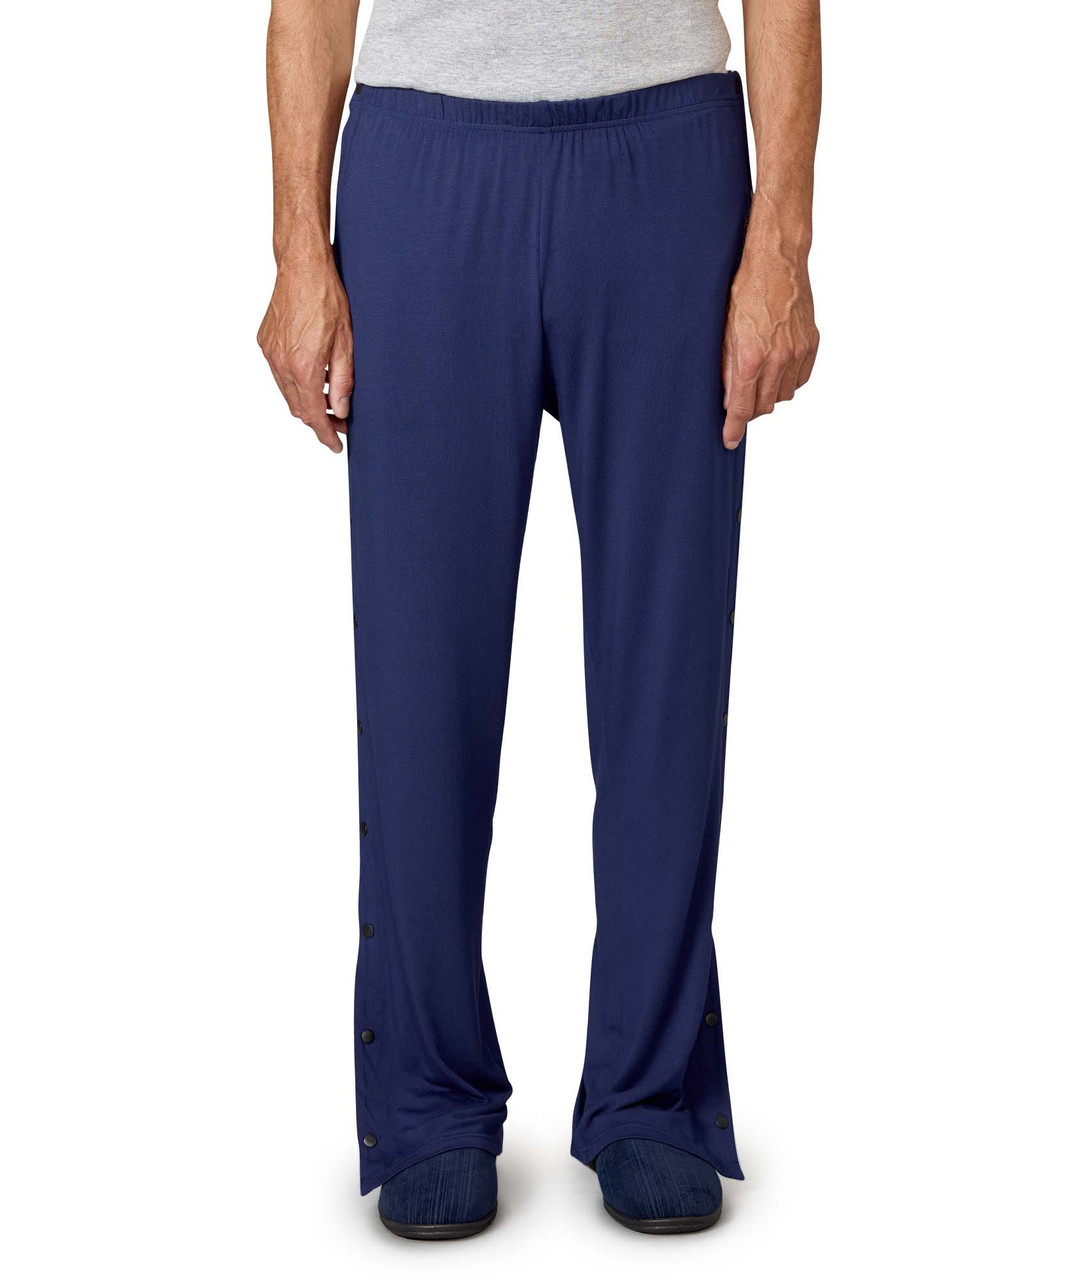 Silverts SV61010 Womens and Mens Post-Surgical Tearaway Pants With Snaps Navy, Size=S, SV61010-SV3-S